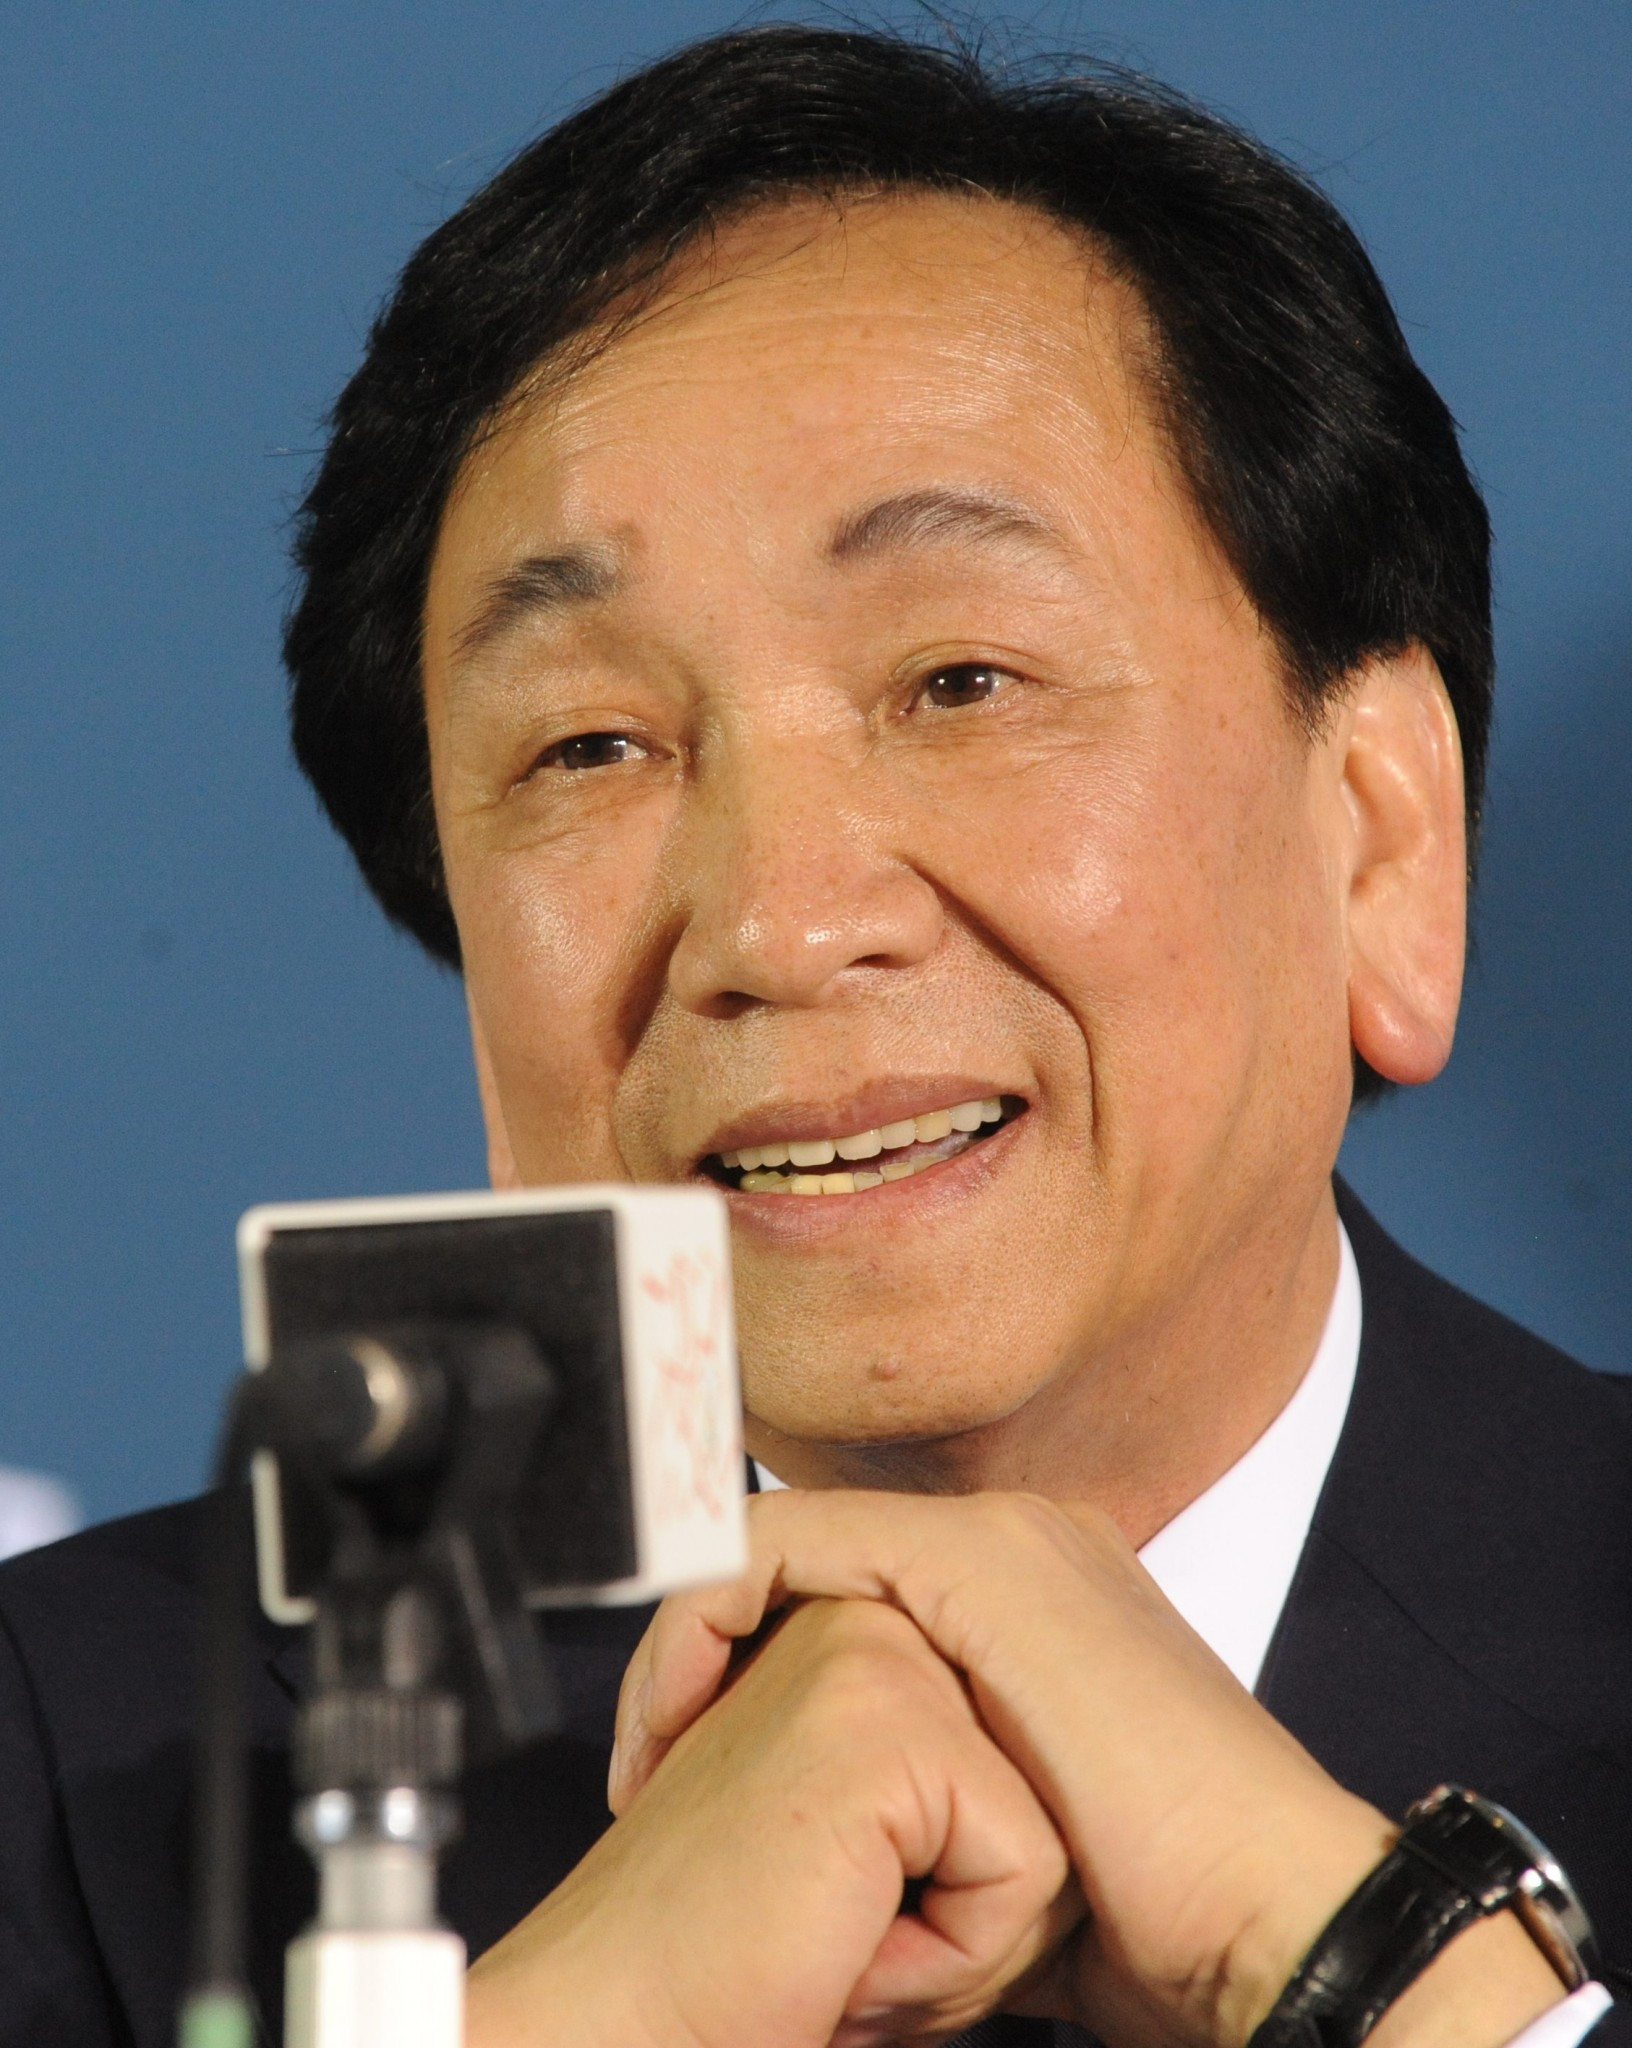 AIBA President C K Wu has said he has no reason to respond to recent letters sent to him by the Interim Management Committee ©AIBA